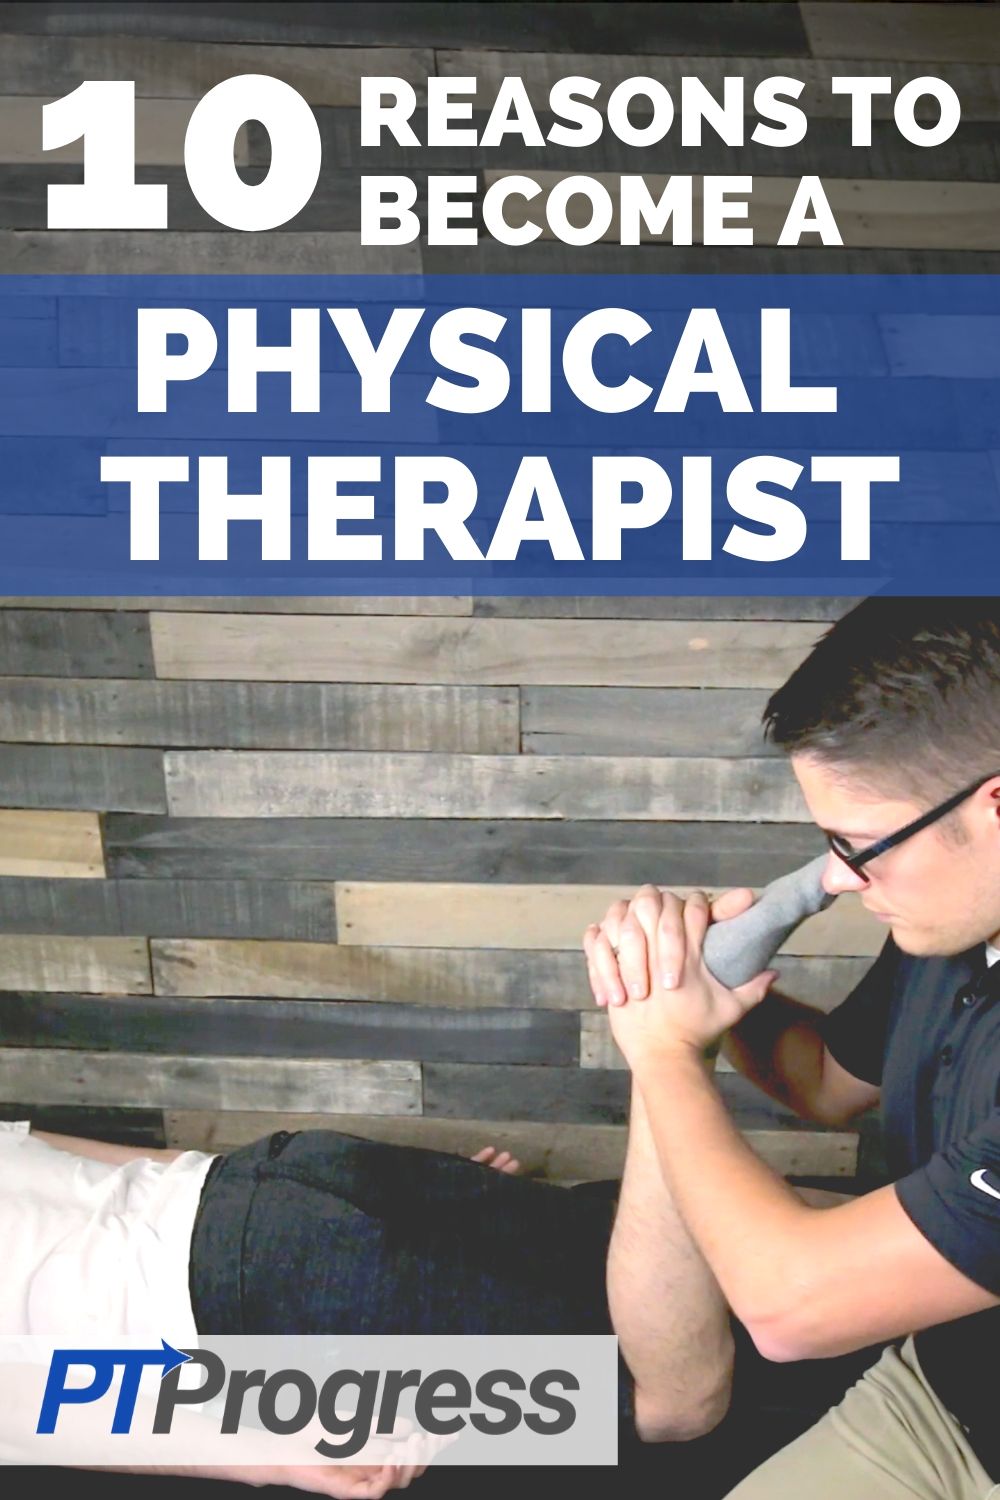 why become a physical therapist essay